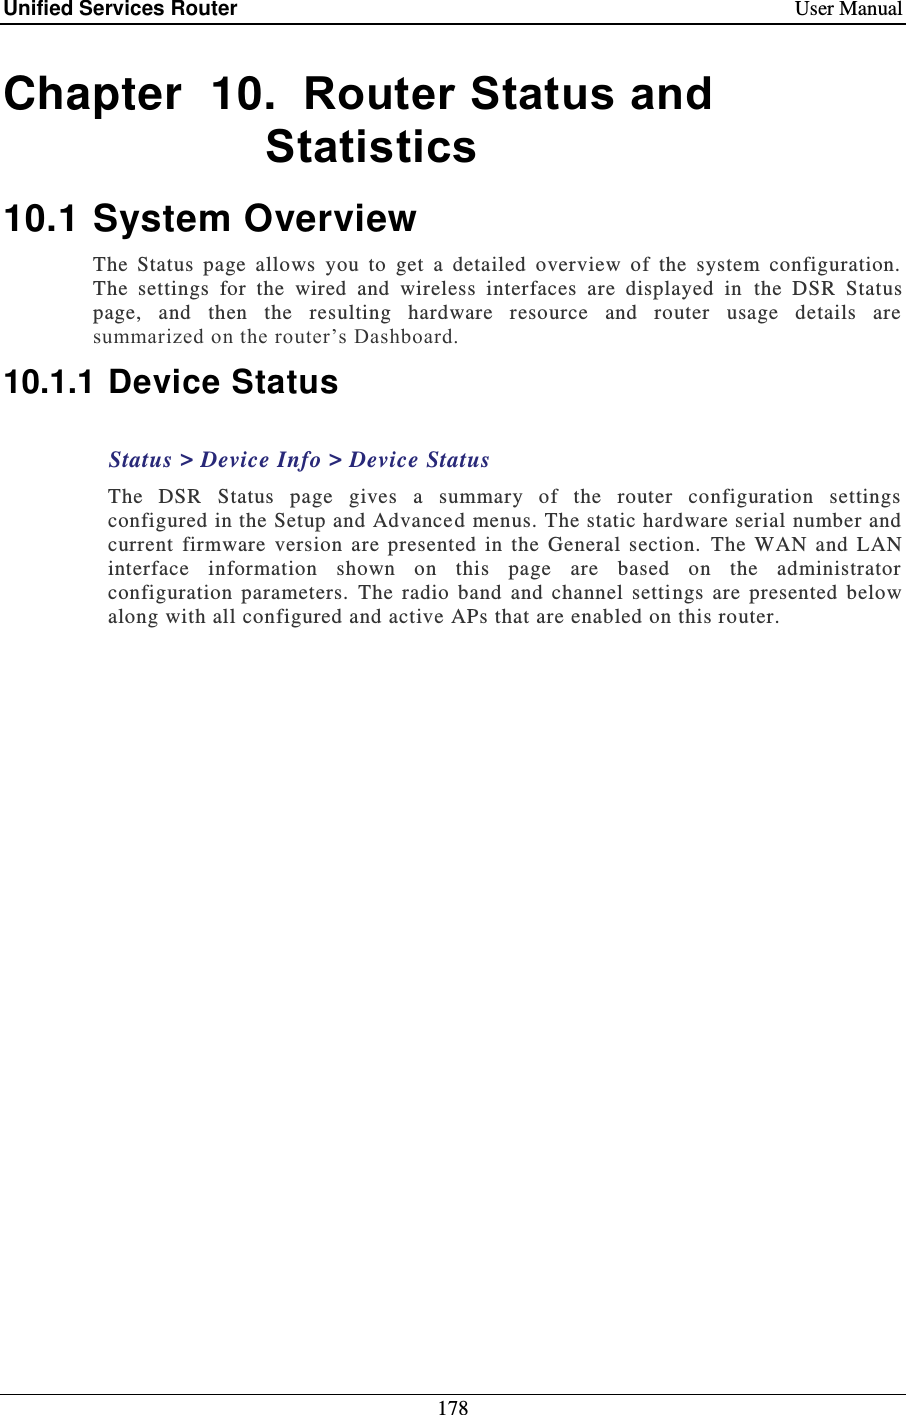 Unified Services Router    User Manual 178  Chapter  10.  Router Status and Statistics 10.1 System Overview The  Status  page  allows  you  to  get  a  detailed  overview  of  the  system  configuration.  The  settings  for  the  wired  and  wireless  interfaces  are  displayed  in  the  DSR  Status page,  and  then  the  resulting  hardware  resource  and  router  usage  details  are summarized on the router’s Dashboard.  10.1.1 Device Status Status &gt; Device Info &gt; Device Status The  DSR  Status  page  gives  a  summary  of  the  router  configuration  settings configured in the Setup and Advanced menus. The static hardware serial number and current  firmware  version  are  presented  in  the  General  section.   The  WAN  and  LAN interface  information  shown  on  this  page  are  based  on  the  administrator configuration  parameters.  The  radio  band  and  channel  settings  are  presented  below along with all configured and active APs that are enabled on this router.   